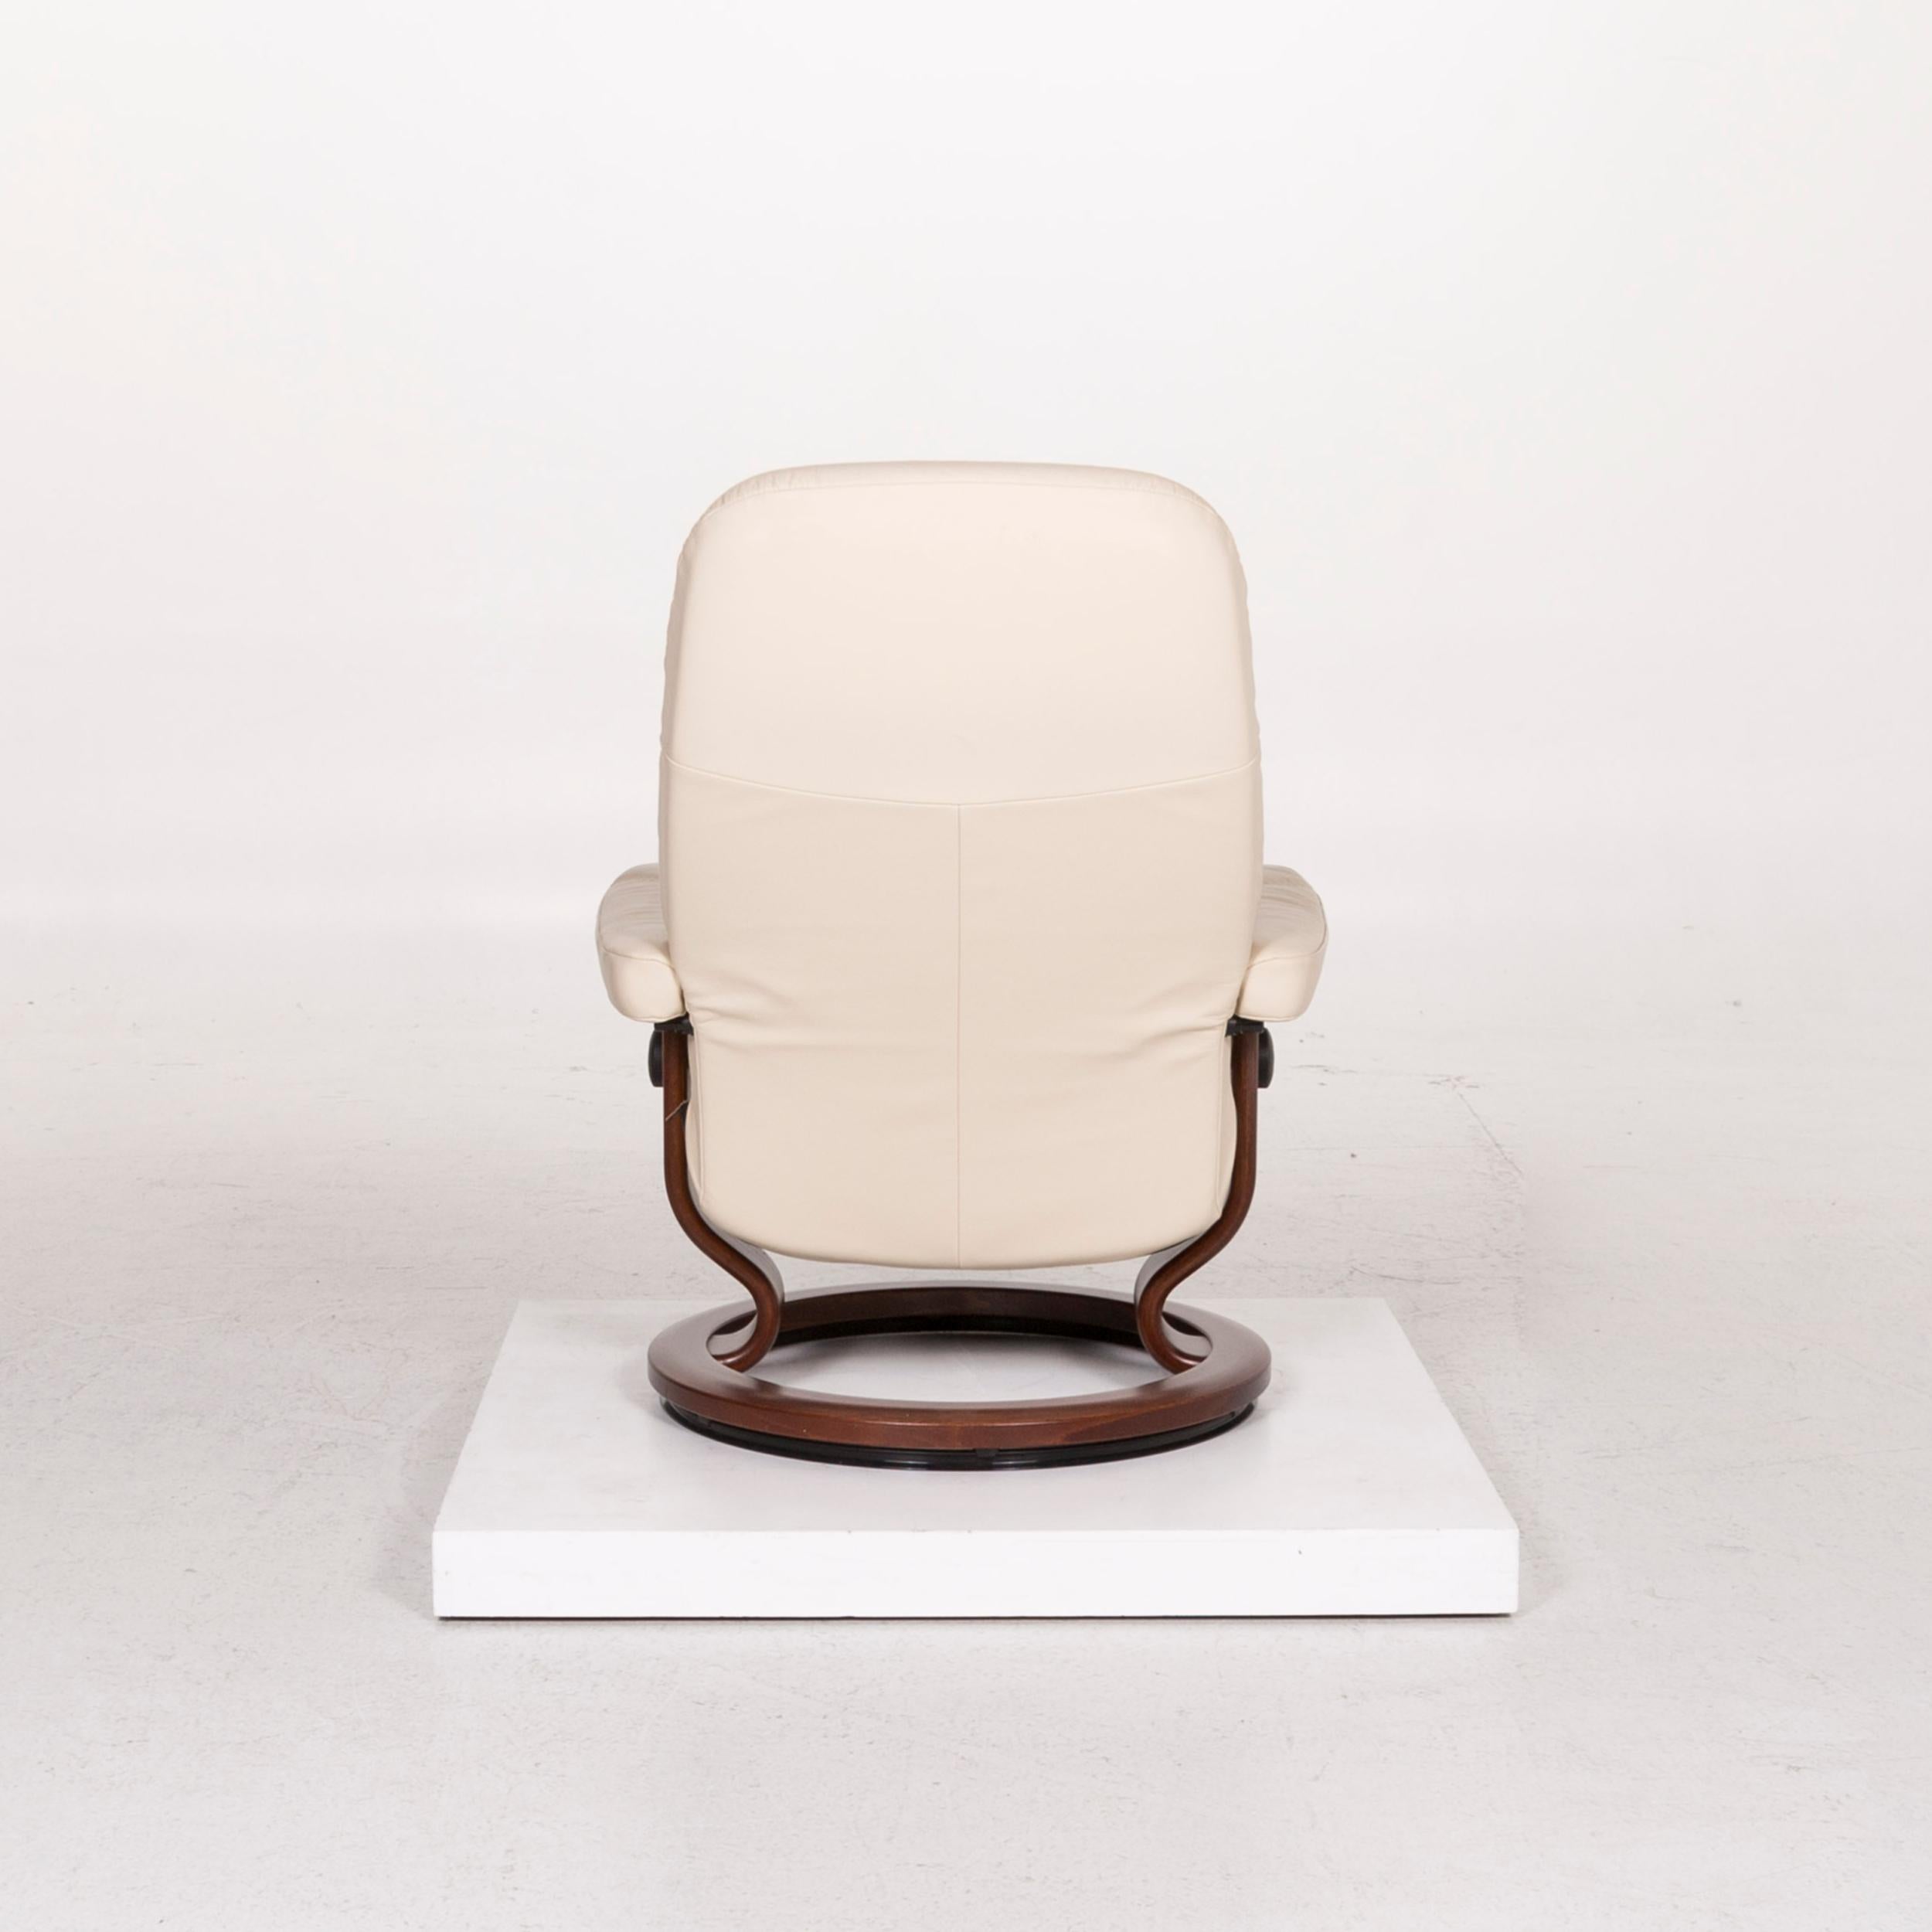 Stressless Consul Leather Armchair Incl. Stool Cream Relax Function Function 7